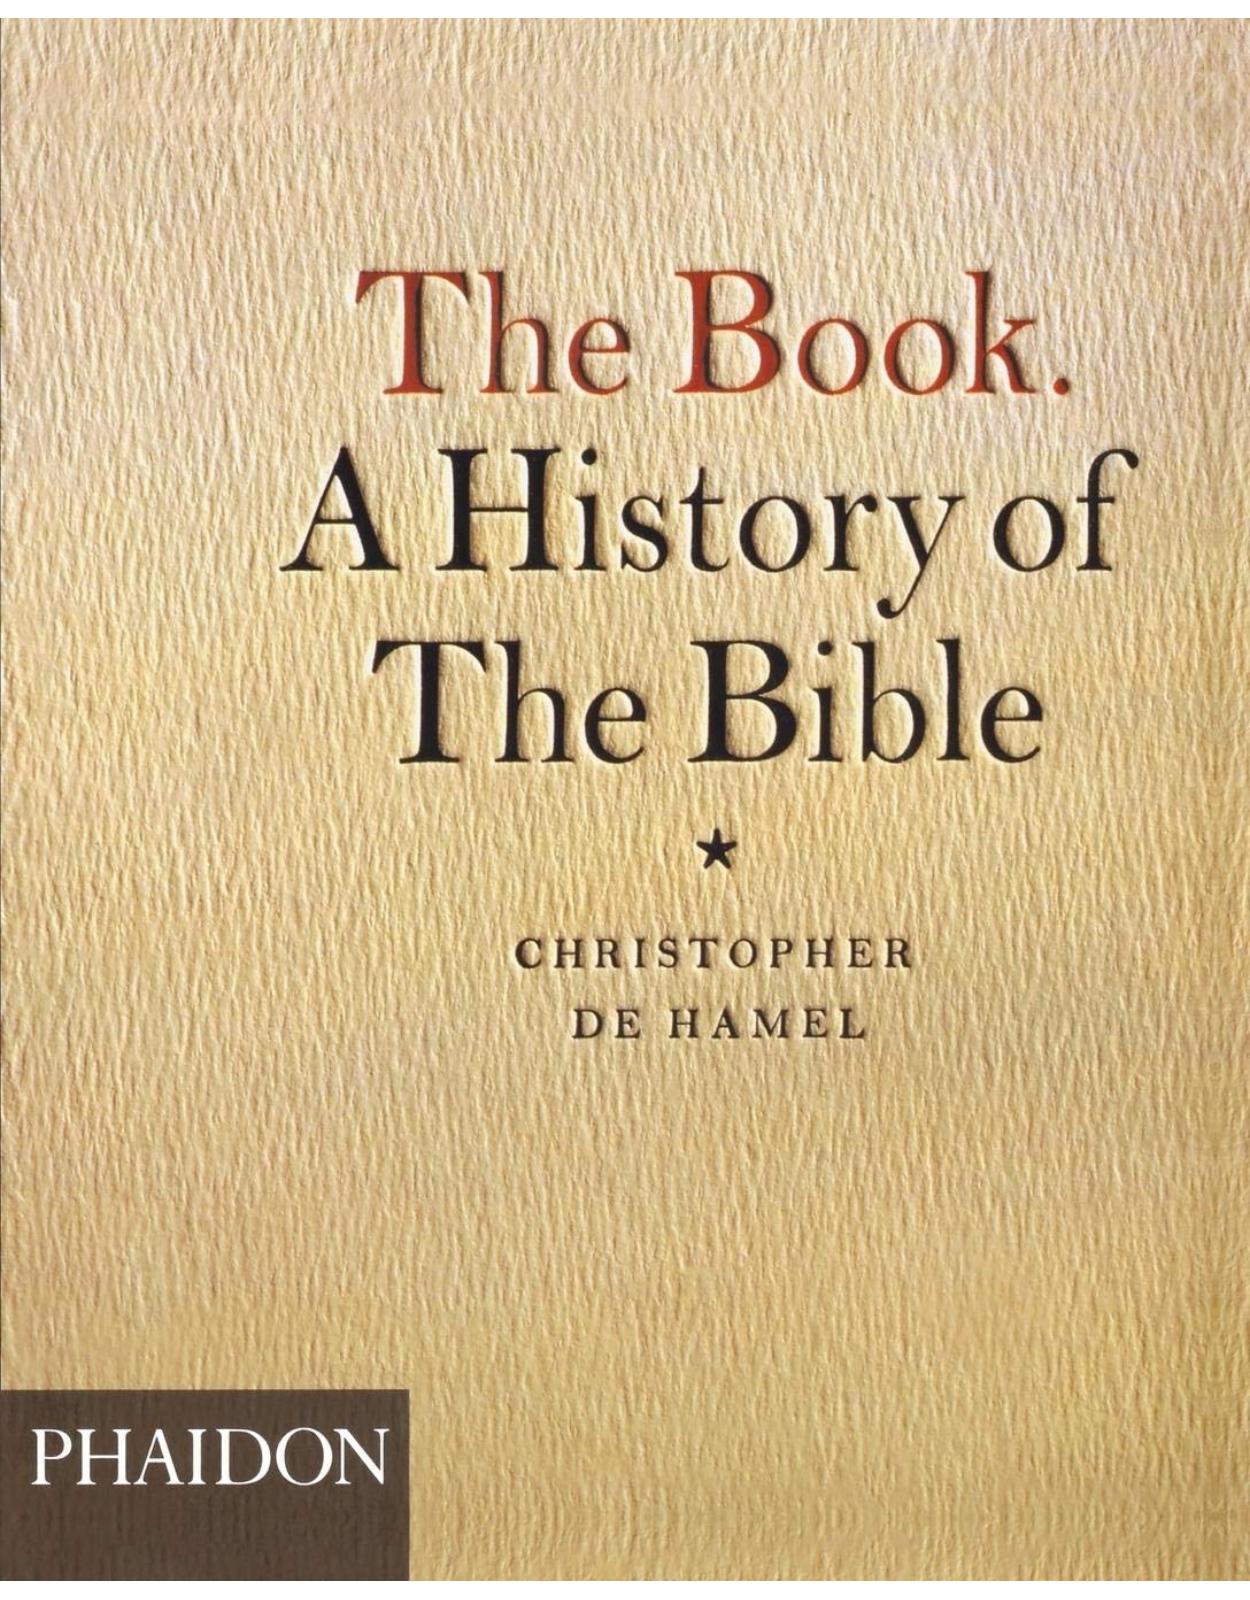 The Book - A History of the Bible